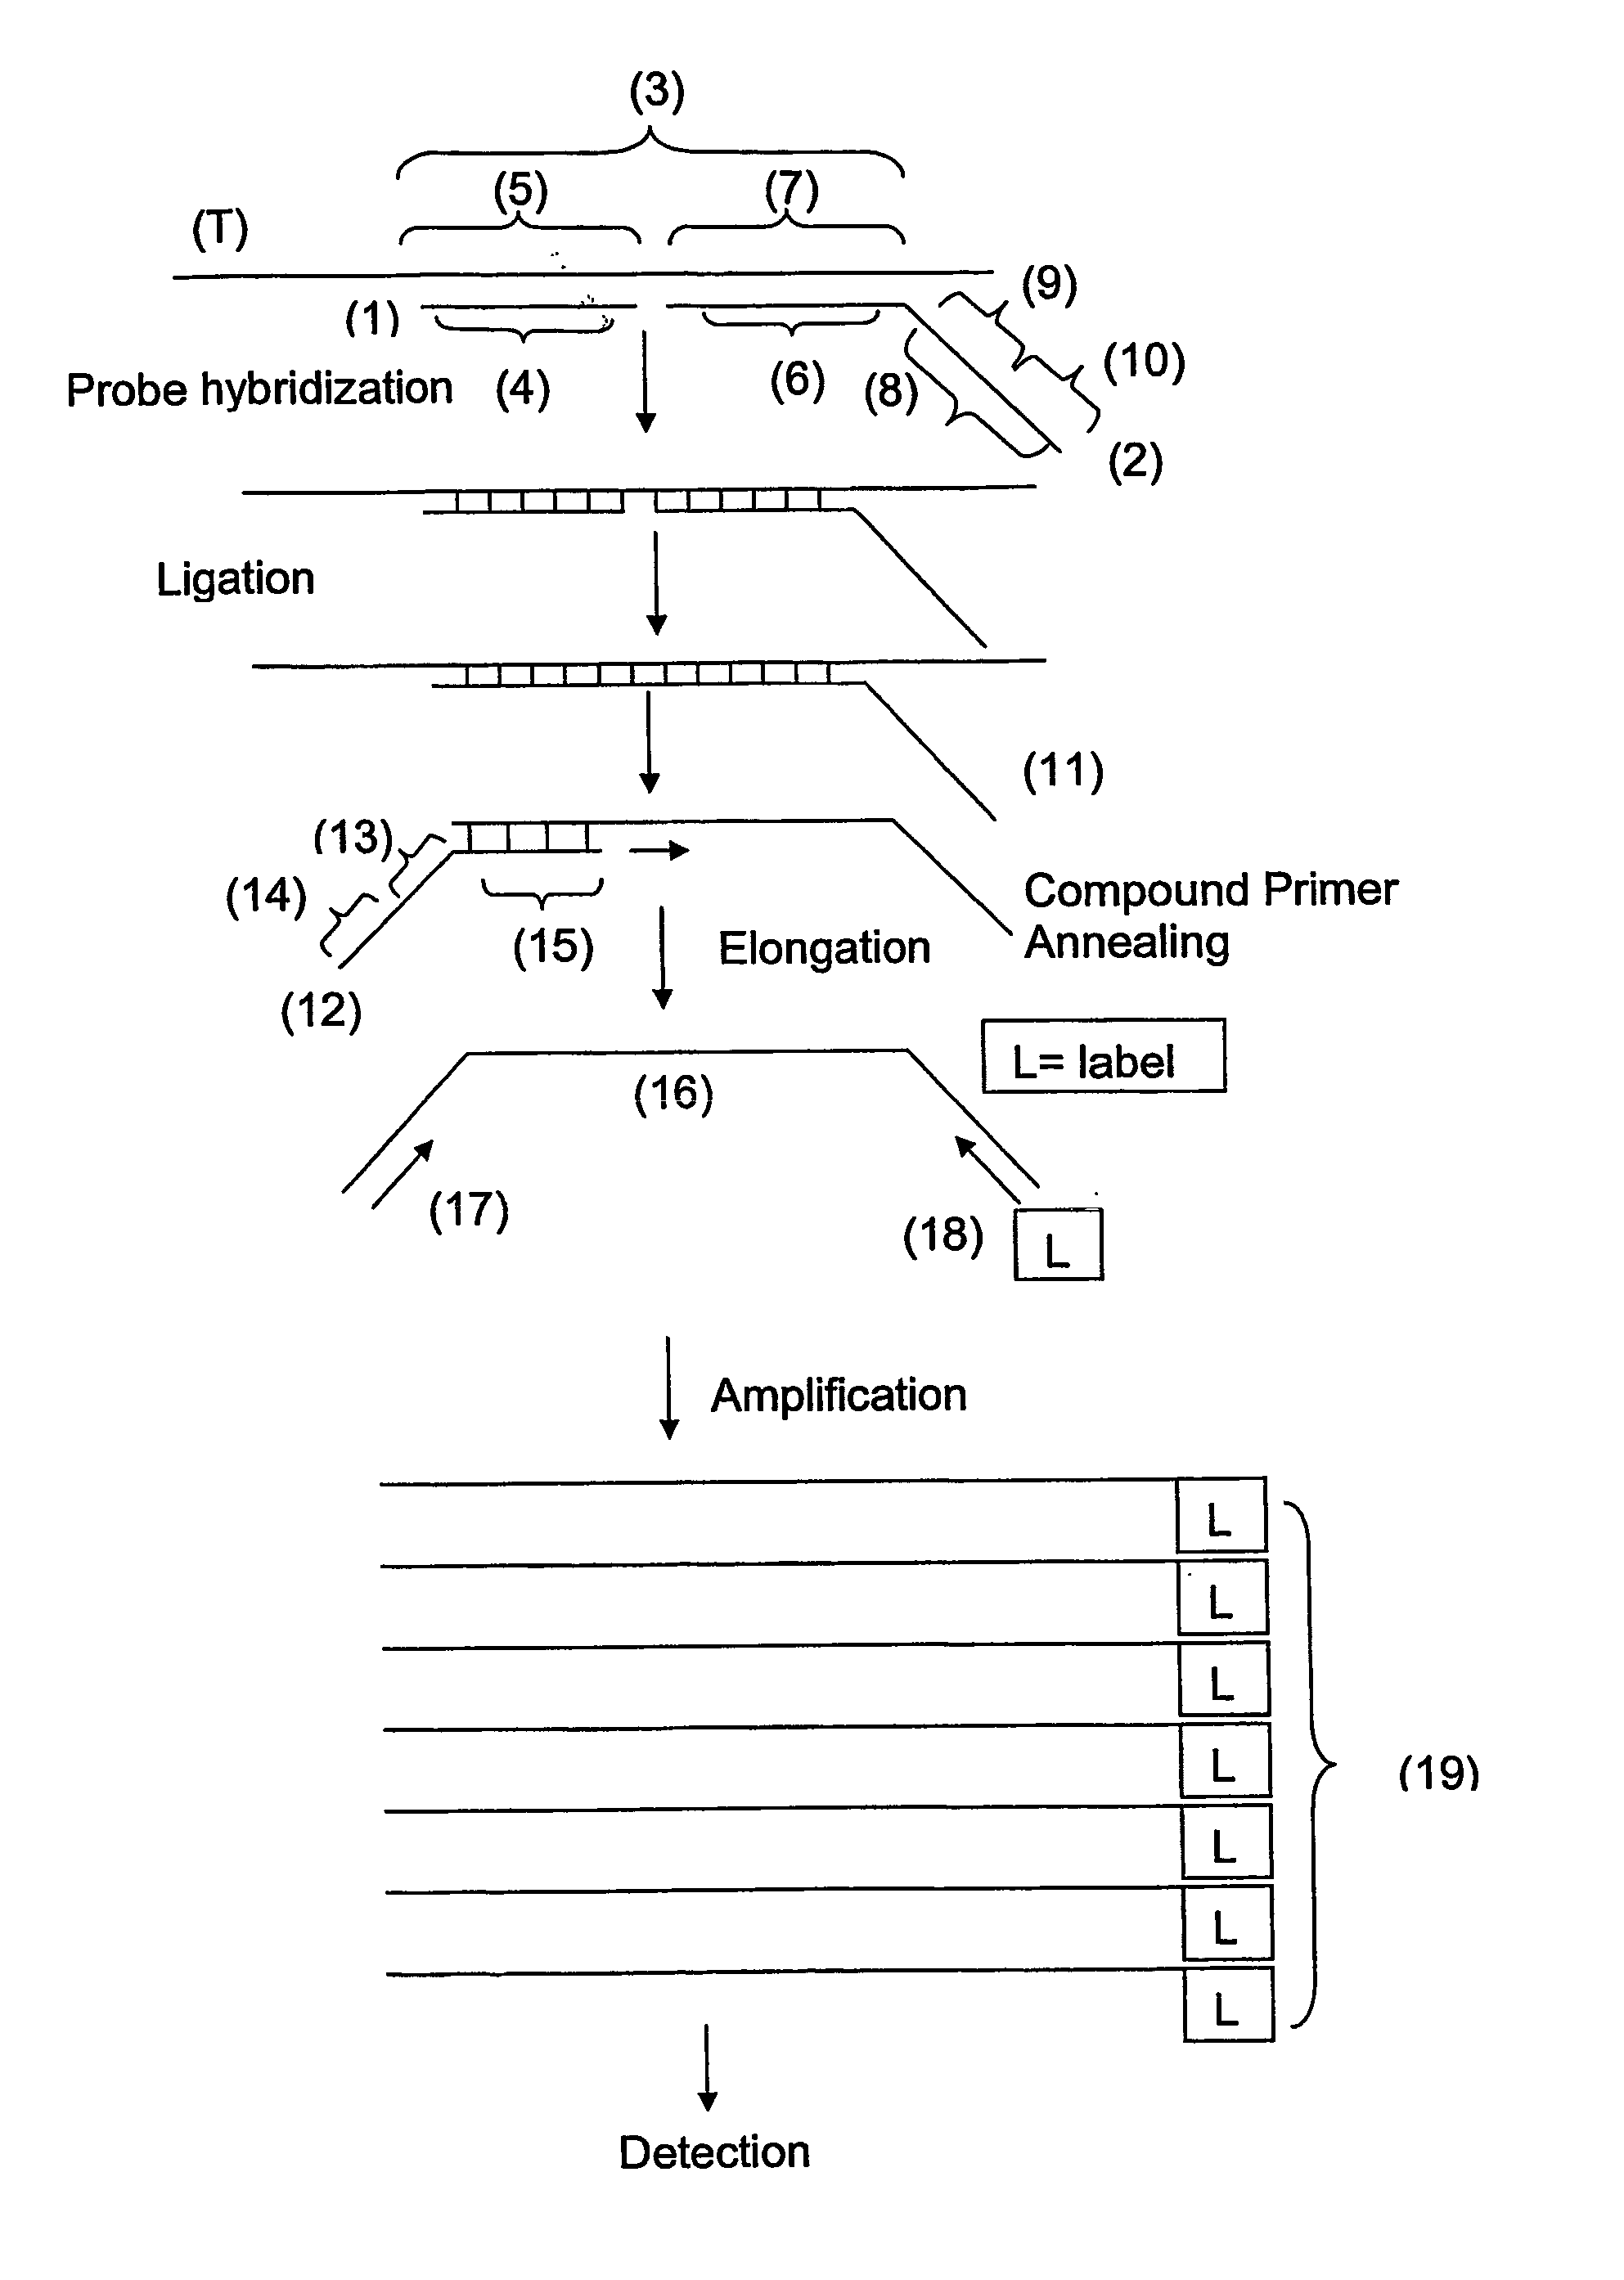 Ola-Based Methods for the Detection of Target Nucleic Avid Sequences